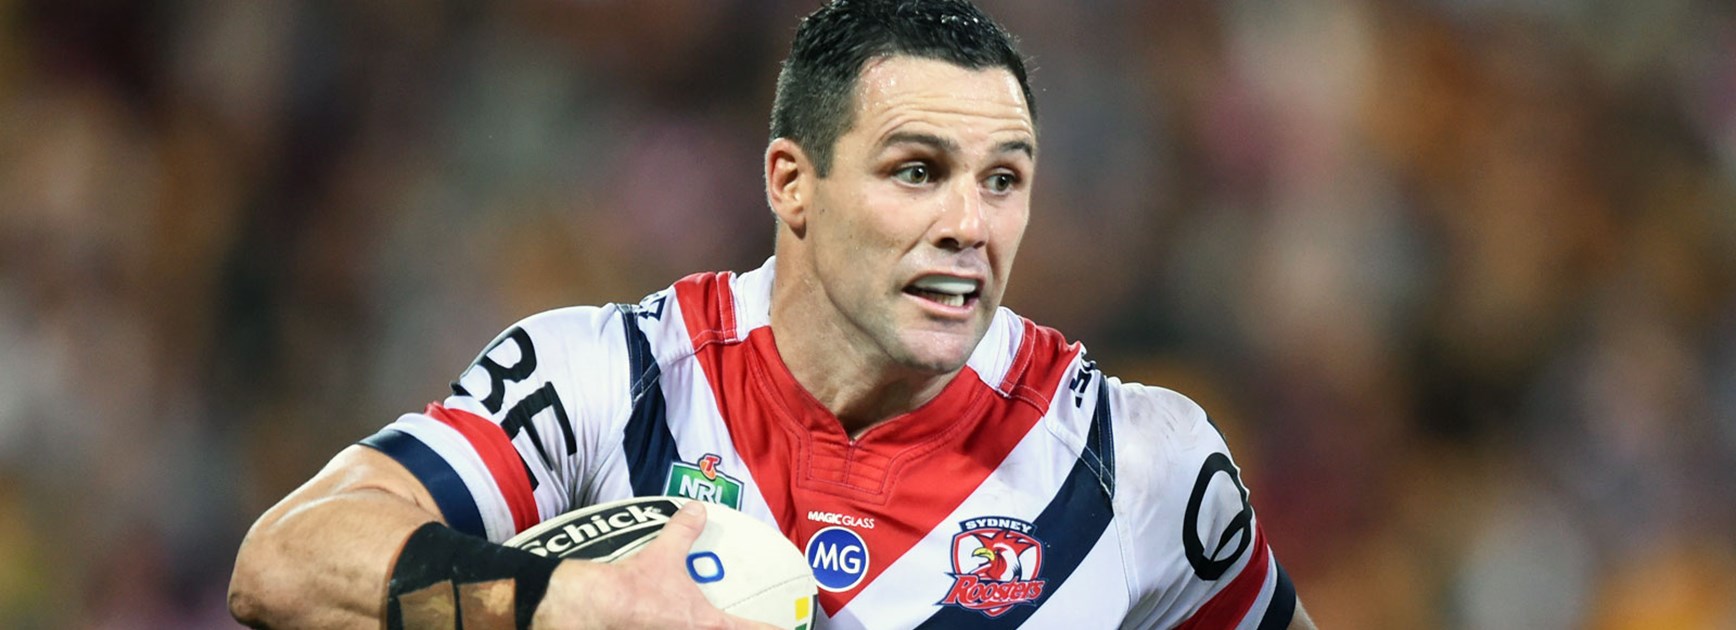 Roosters fullback Michael Gordon against the Broncos in Round 6.